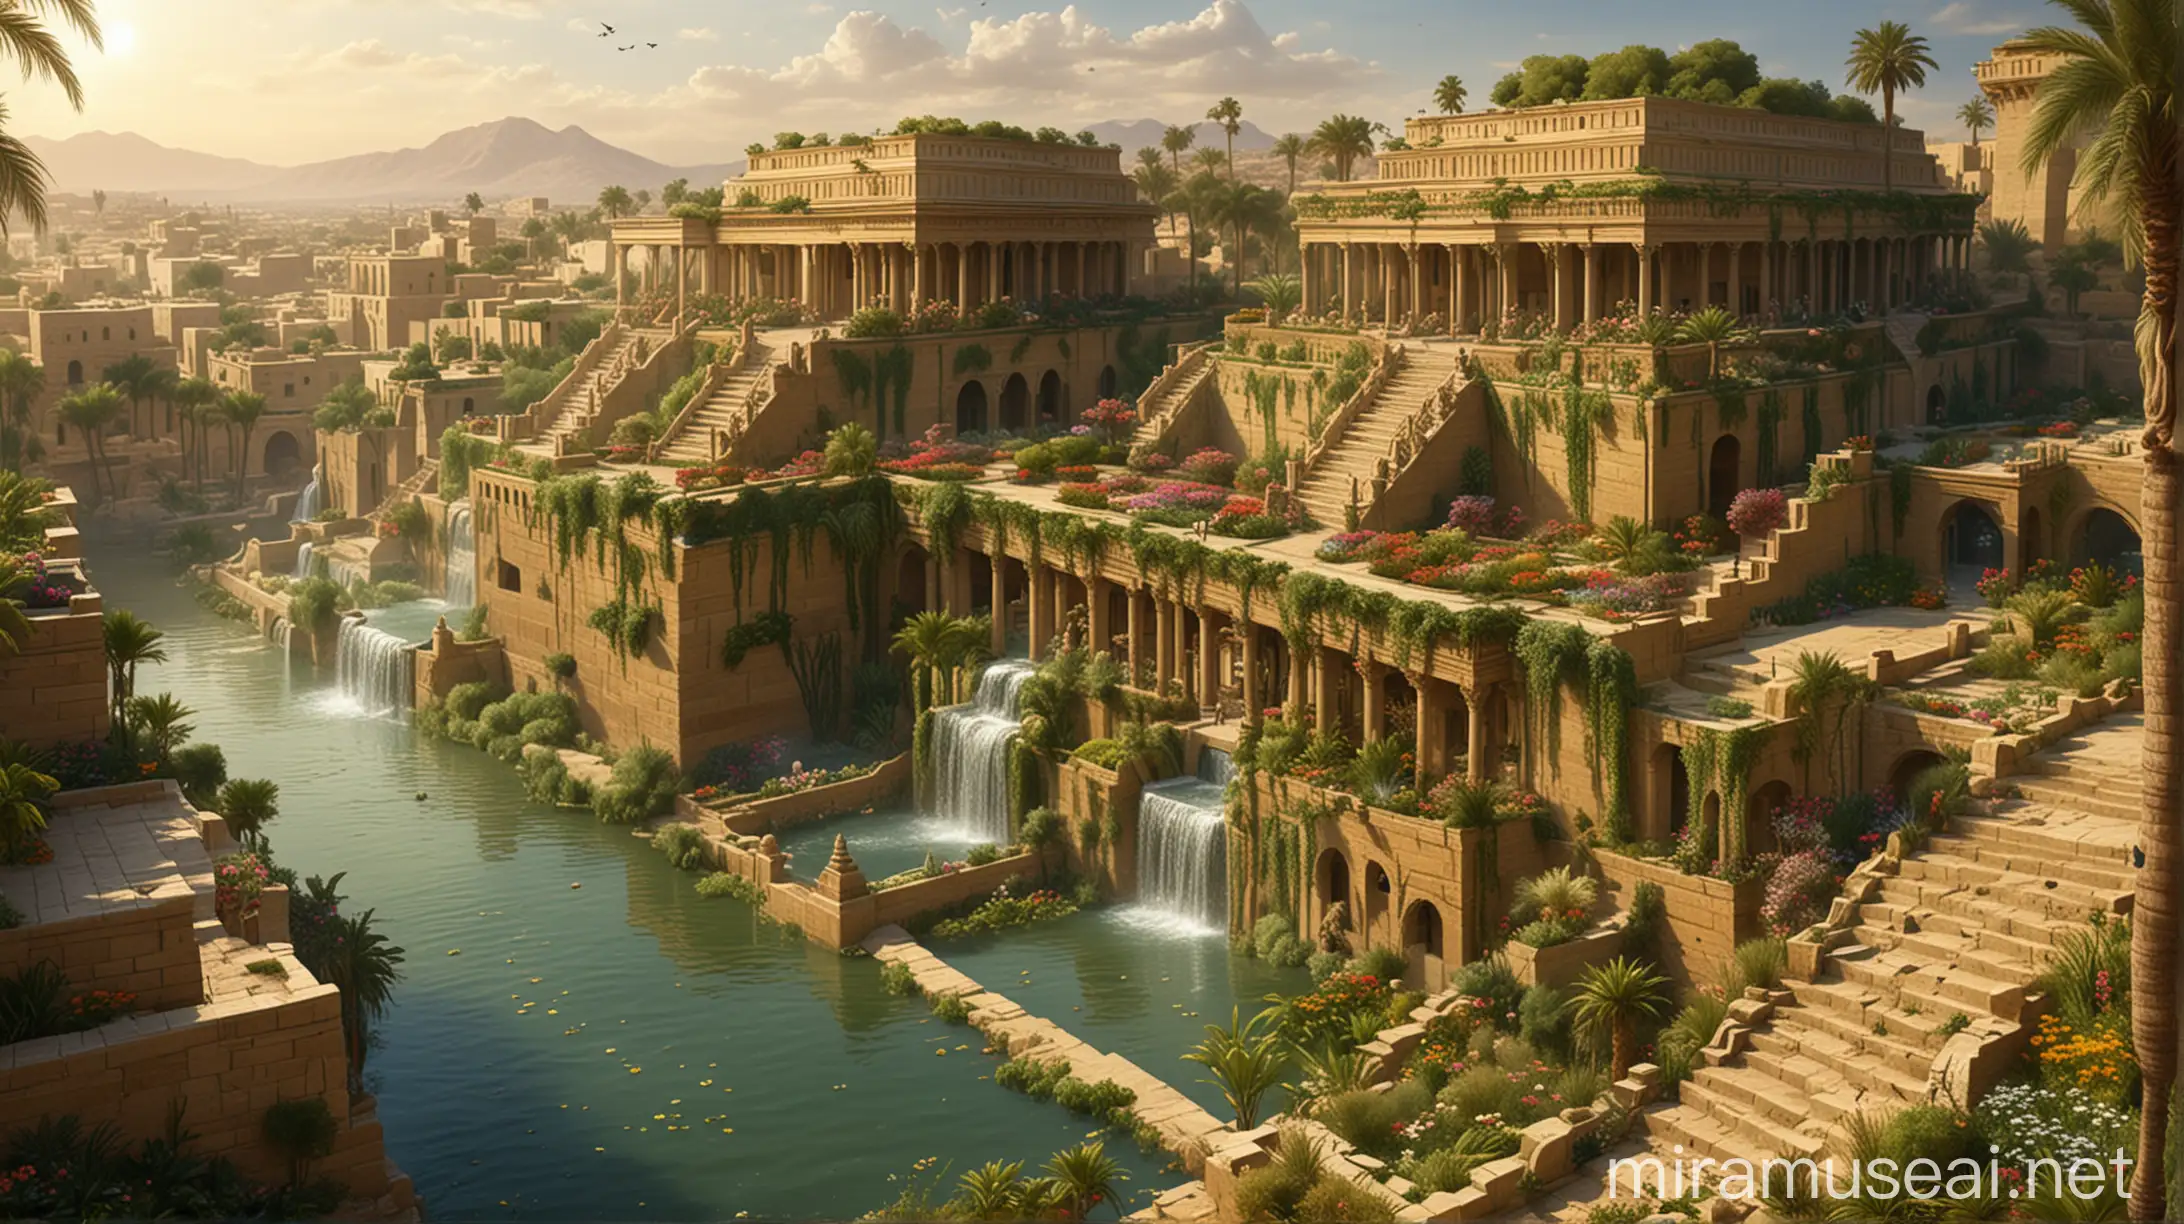 Create a visually captivating image of the Hanging Gardens of Babylon, as described in historical texts. The image should depict a series of elevated terraces filled with lush trees, flowers, and exotic plants. Include an intricate irrigation system, possibly with water being lifted from the Euphrates River by ancient pumps and channels. Surround the gardens with the ancient cityscape of Babylon, with glimpses of other historical structures. The overall scene should convey a sense of wonder and ancient ingenuity, capturing the mystique of one of the Seven Wonders of the Ancient World."

Additional Details:

Use vibrant and diverse colors to highlight the variety of plants and flowers.
Incorporate elements of ancient Mesopotamian architecture.
Add a background with a river and the distant outline of ancient Babylon.
Create an atmosphere of serenity and magnificence, reflecting the legendary status of the gardens.